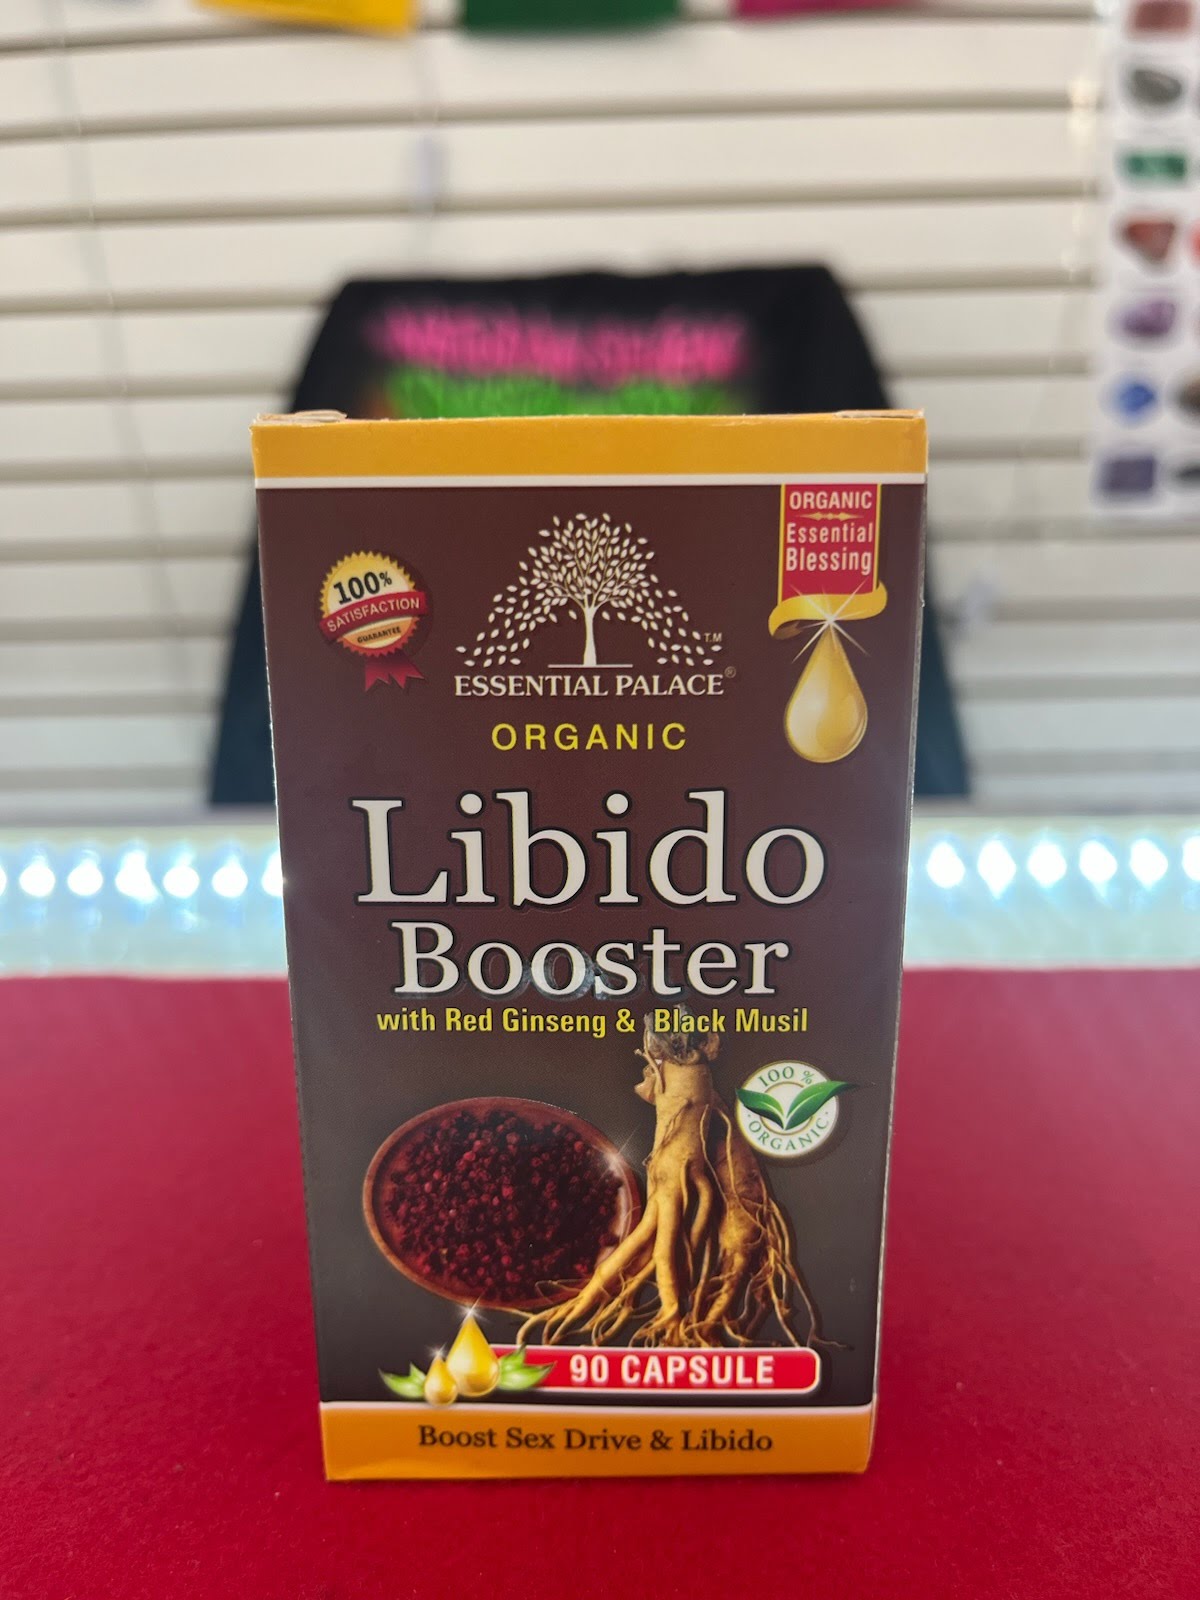 A box of organic libido booster with caffeine and herbal blend.